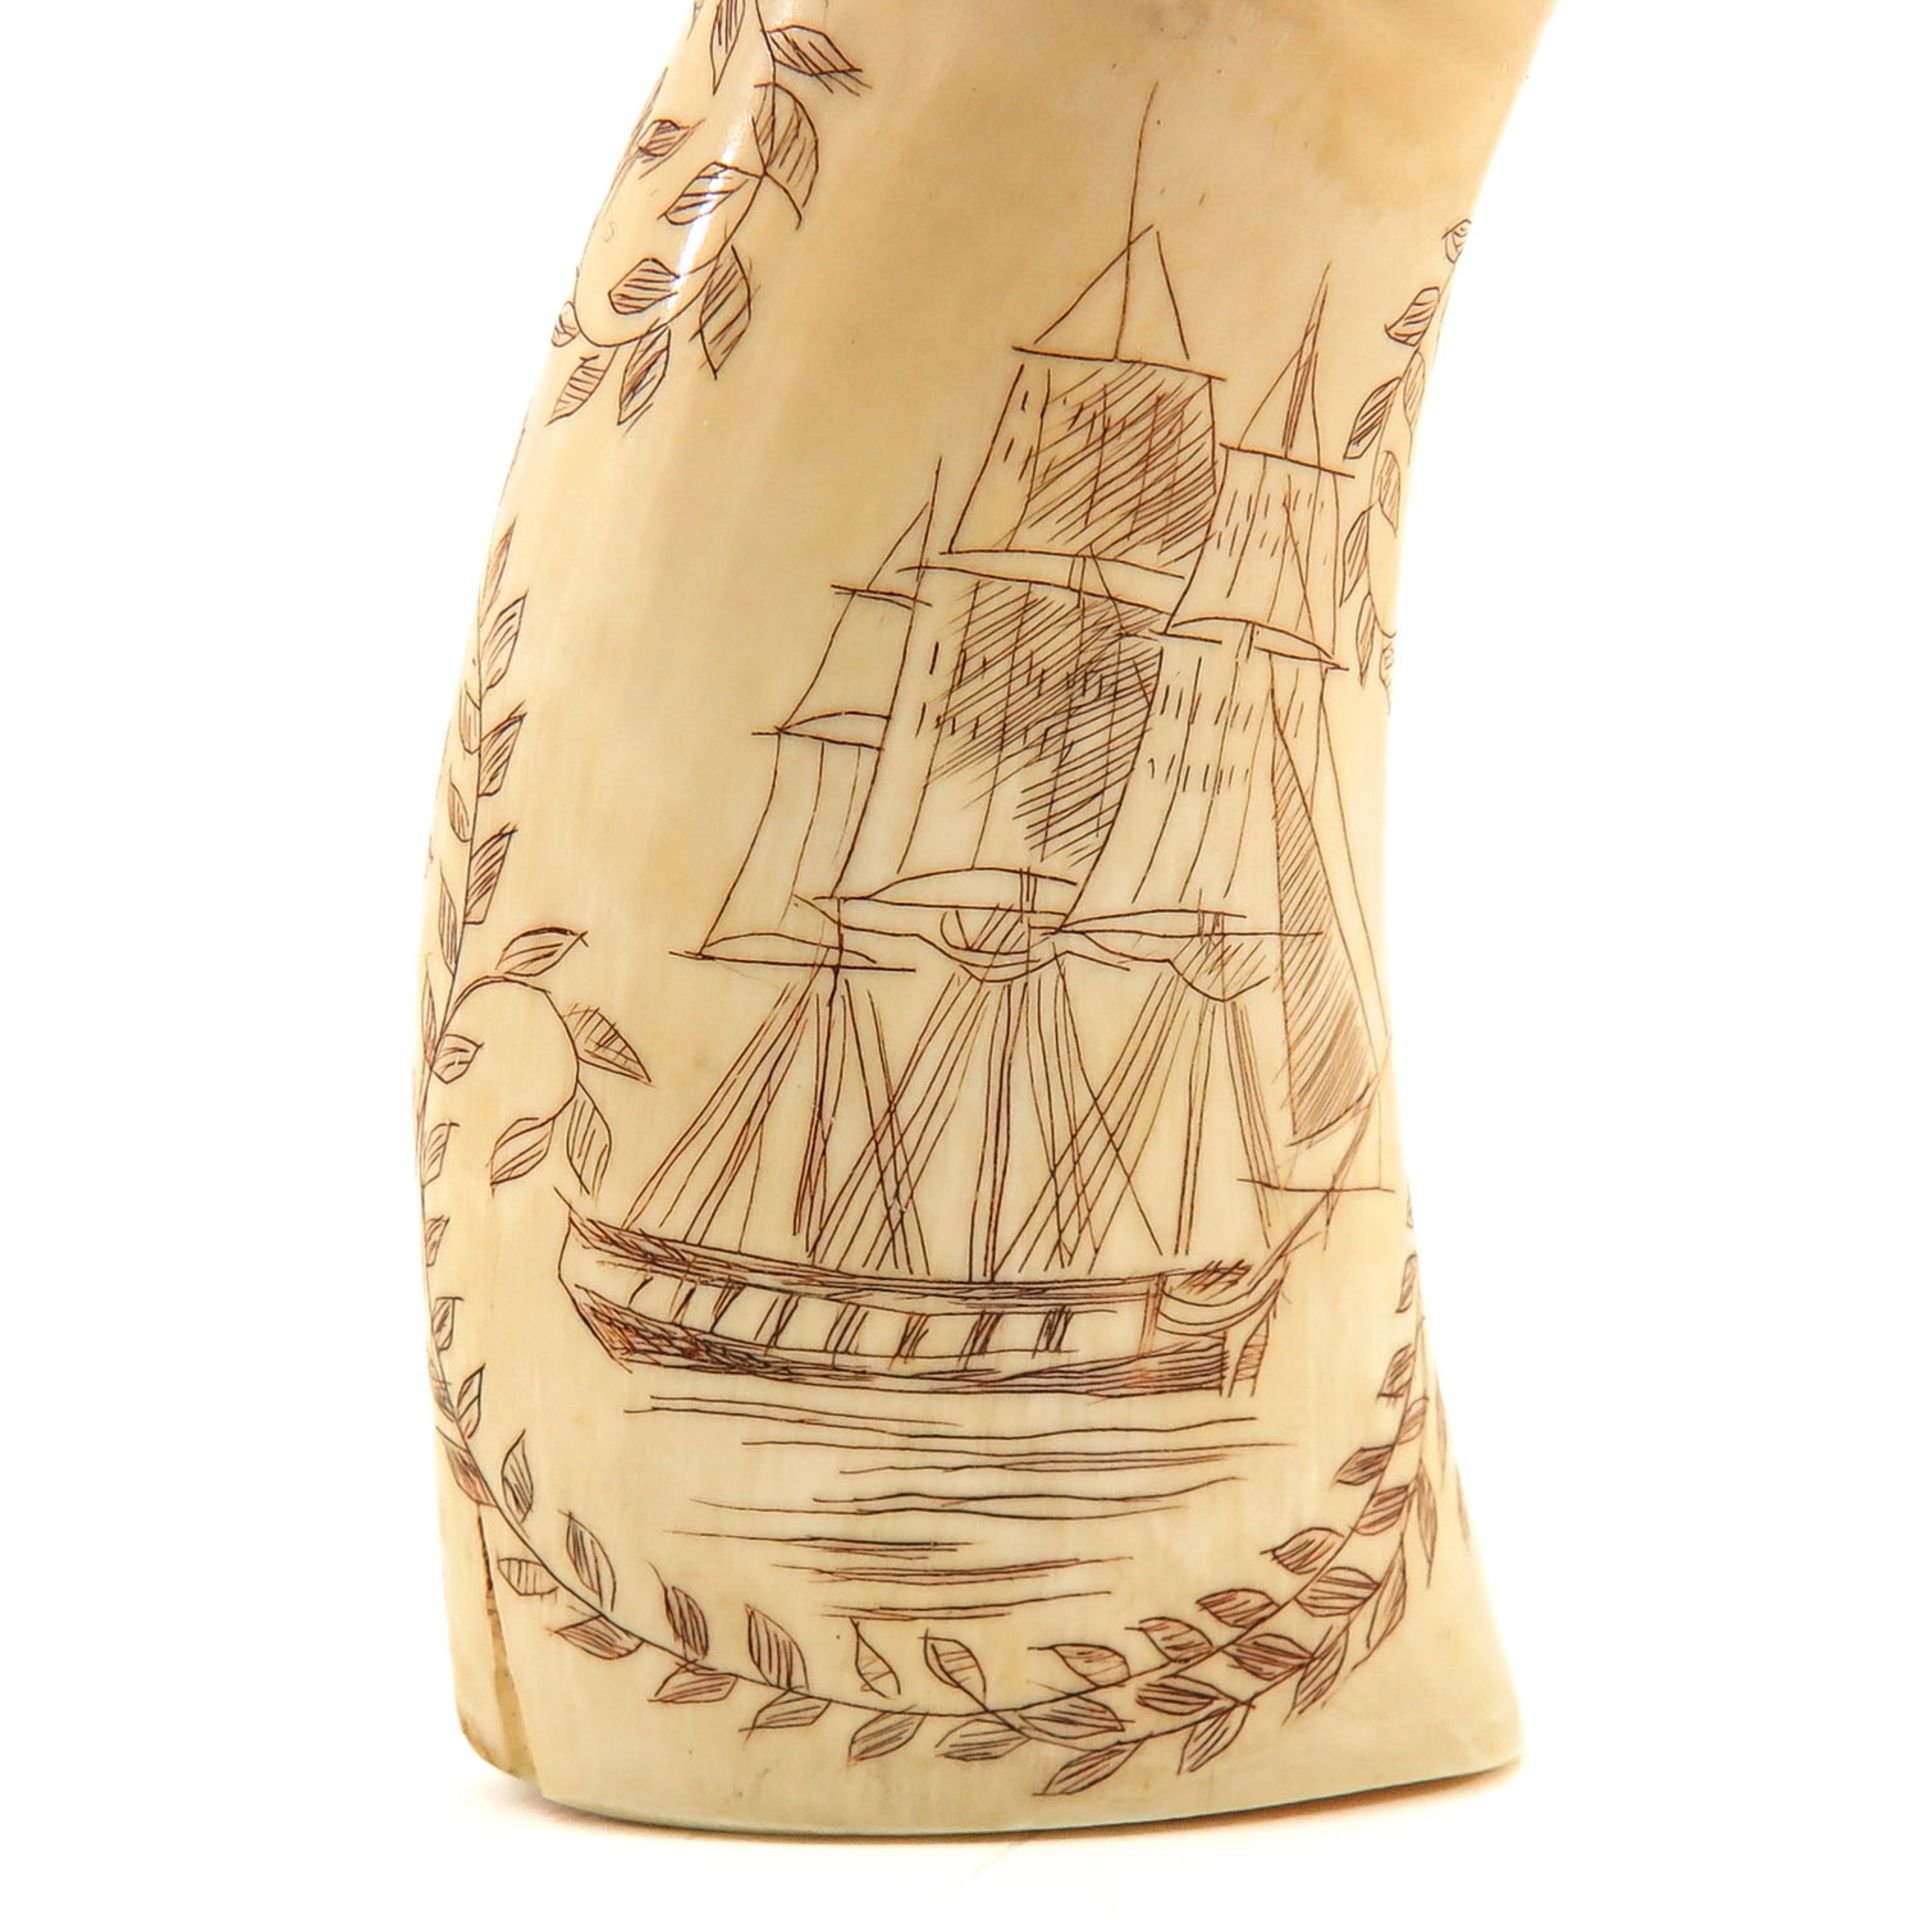 A 19th Century Scrimshaw Depicting Lady - Image 7 of 8